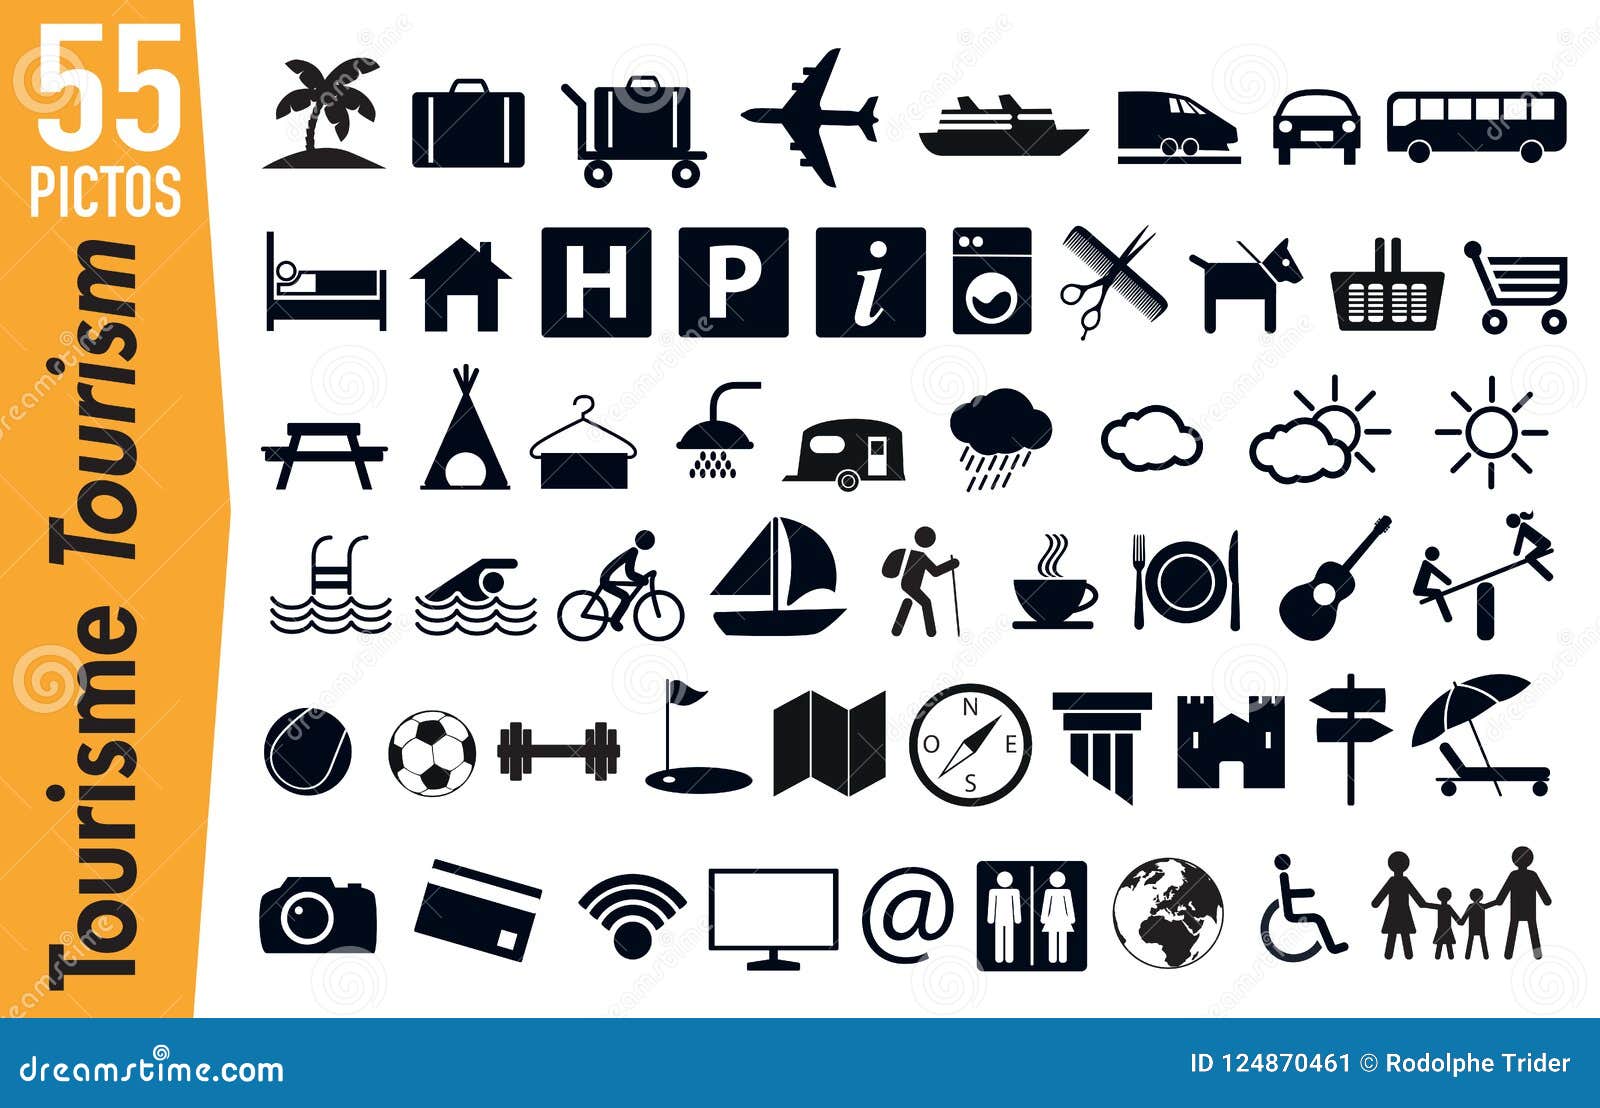 55 signage pictograms on tourism and holidays